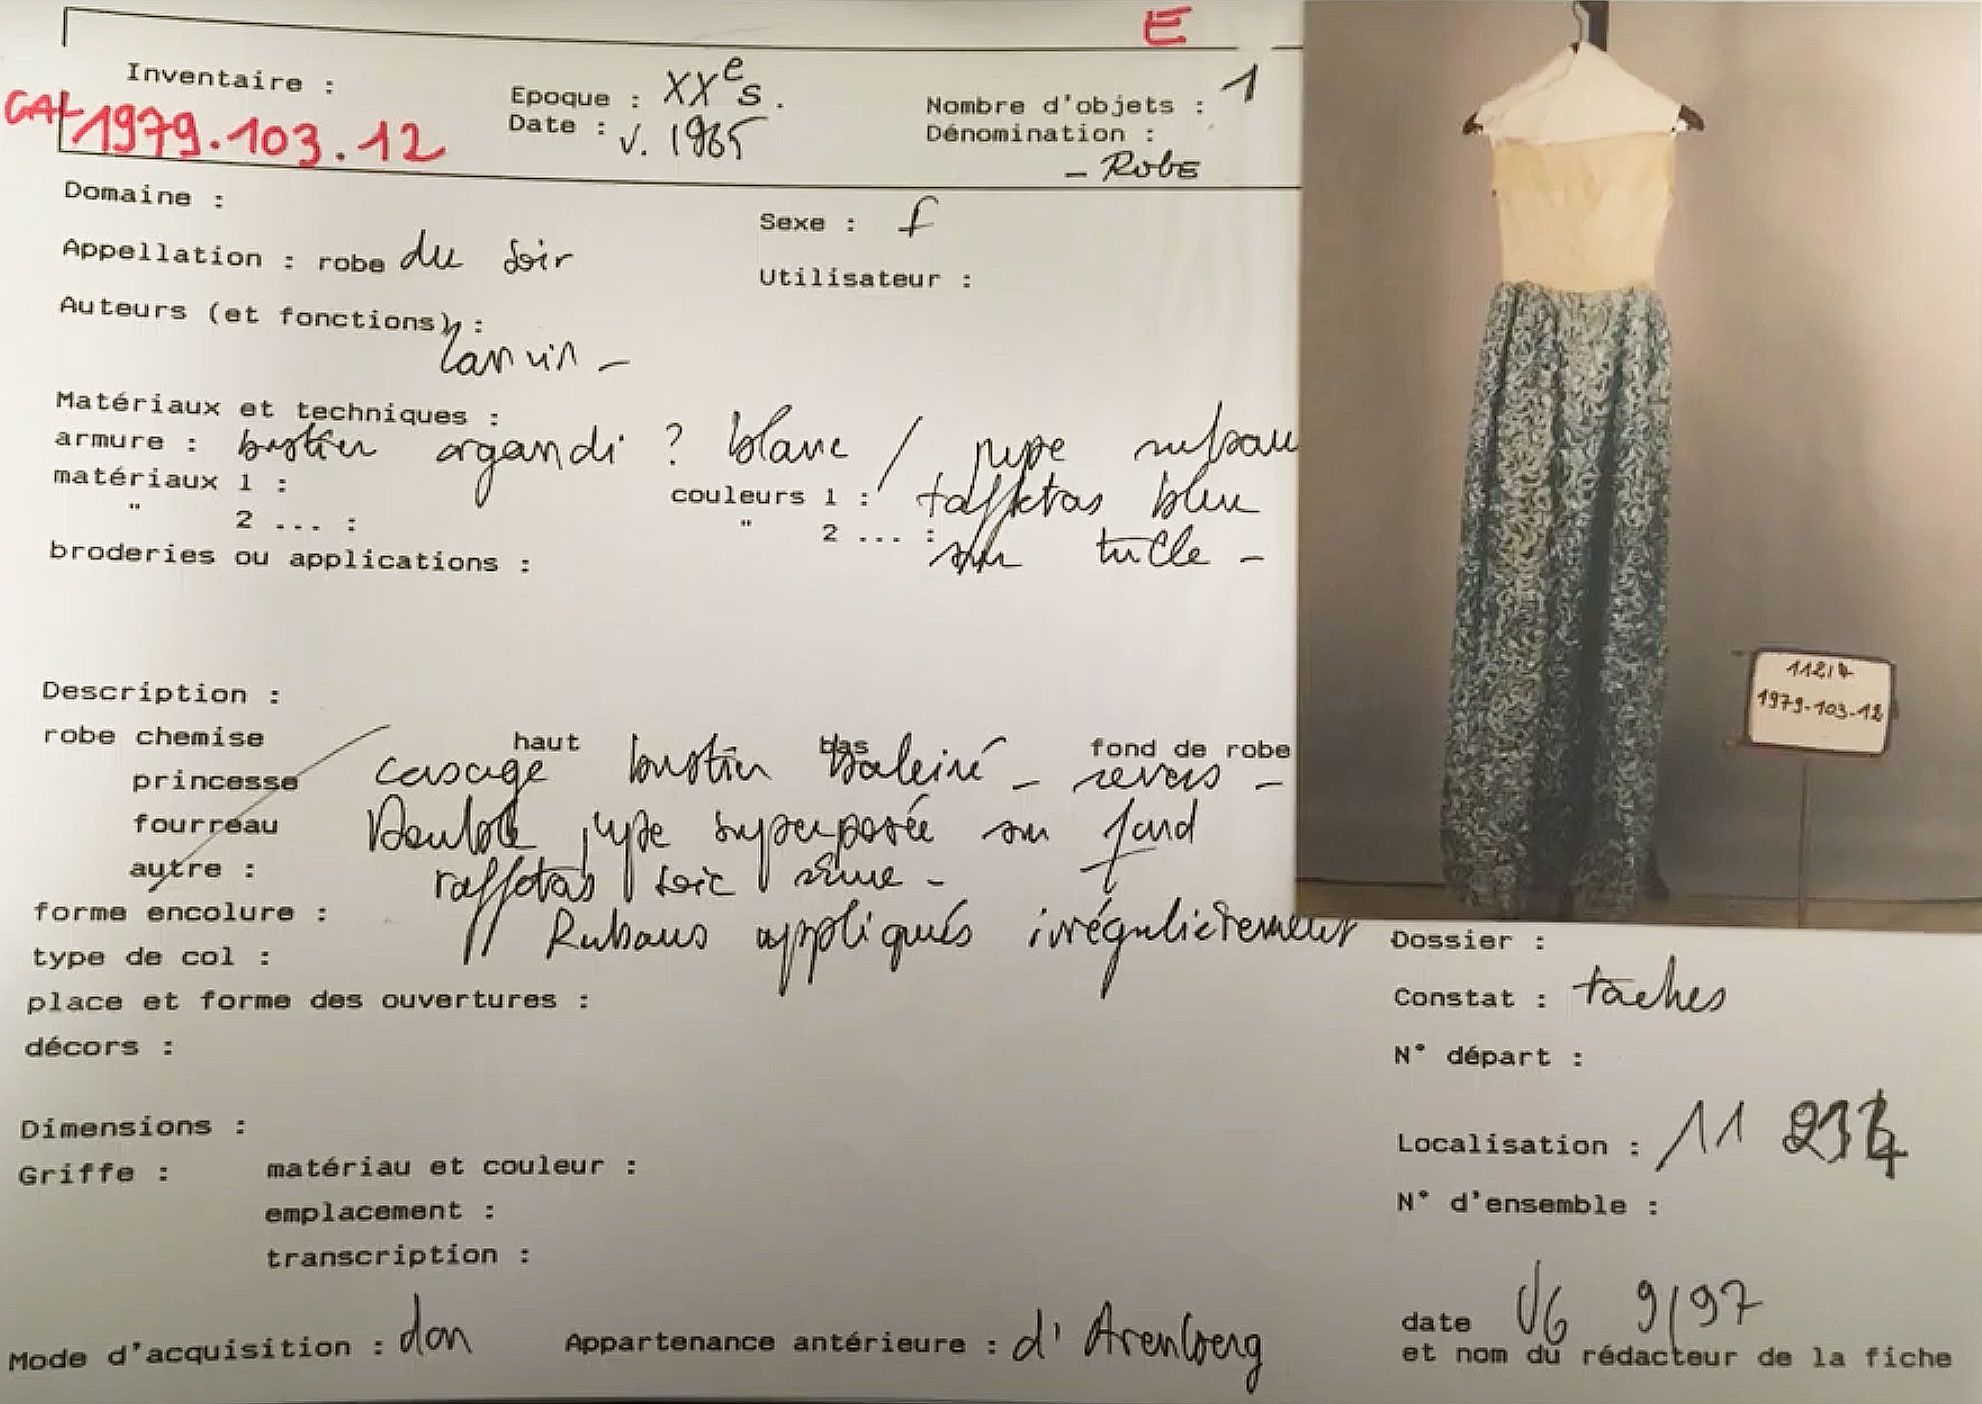 Inventory for theatre costume, hand-written in French